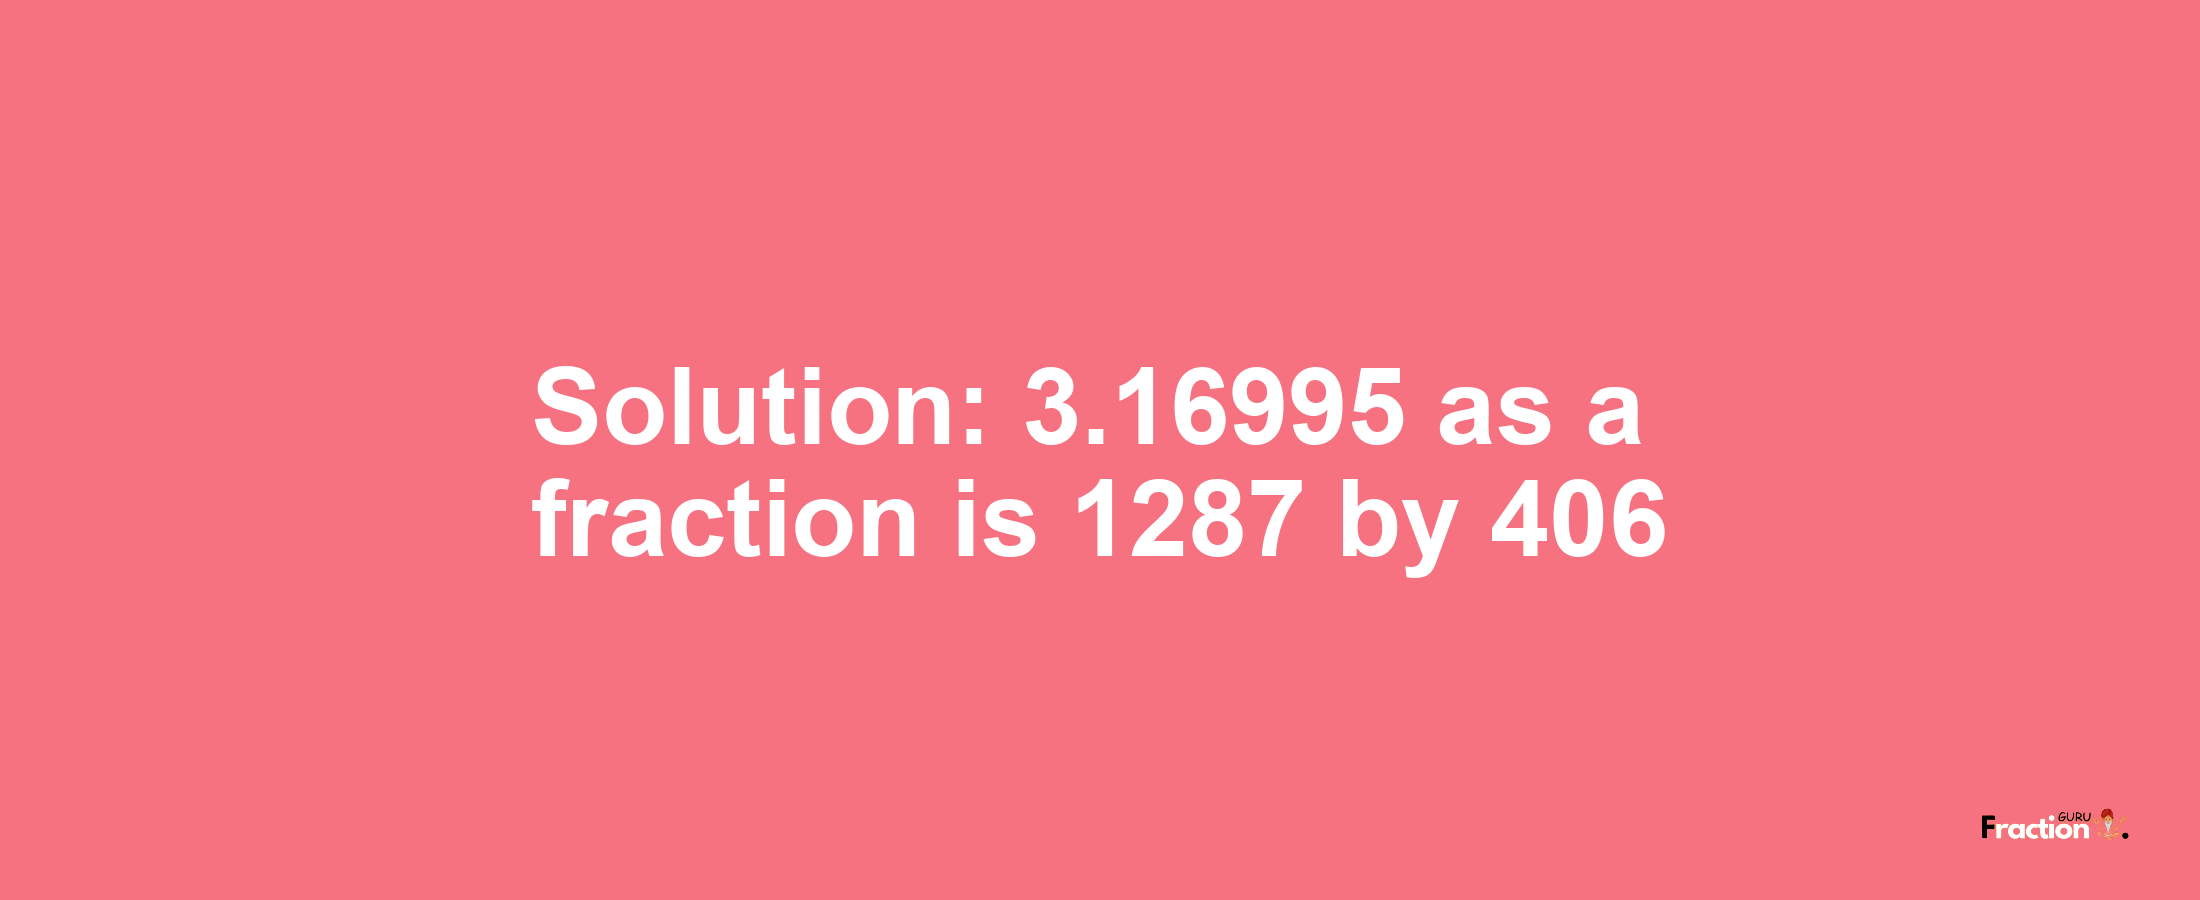 Solution:3.16995 as a fraction is 1287/406